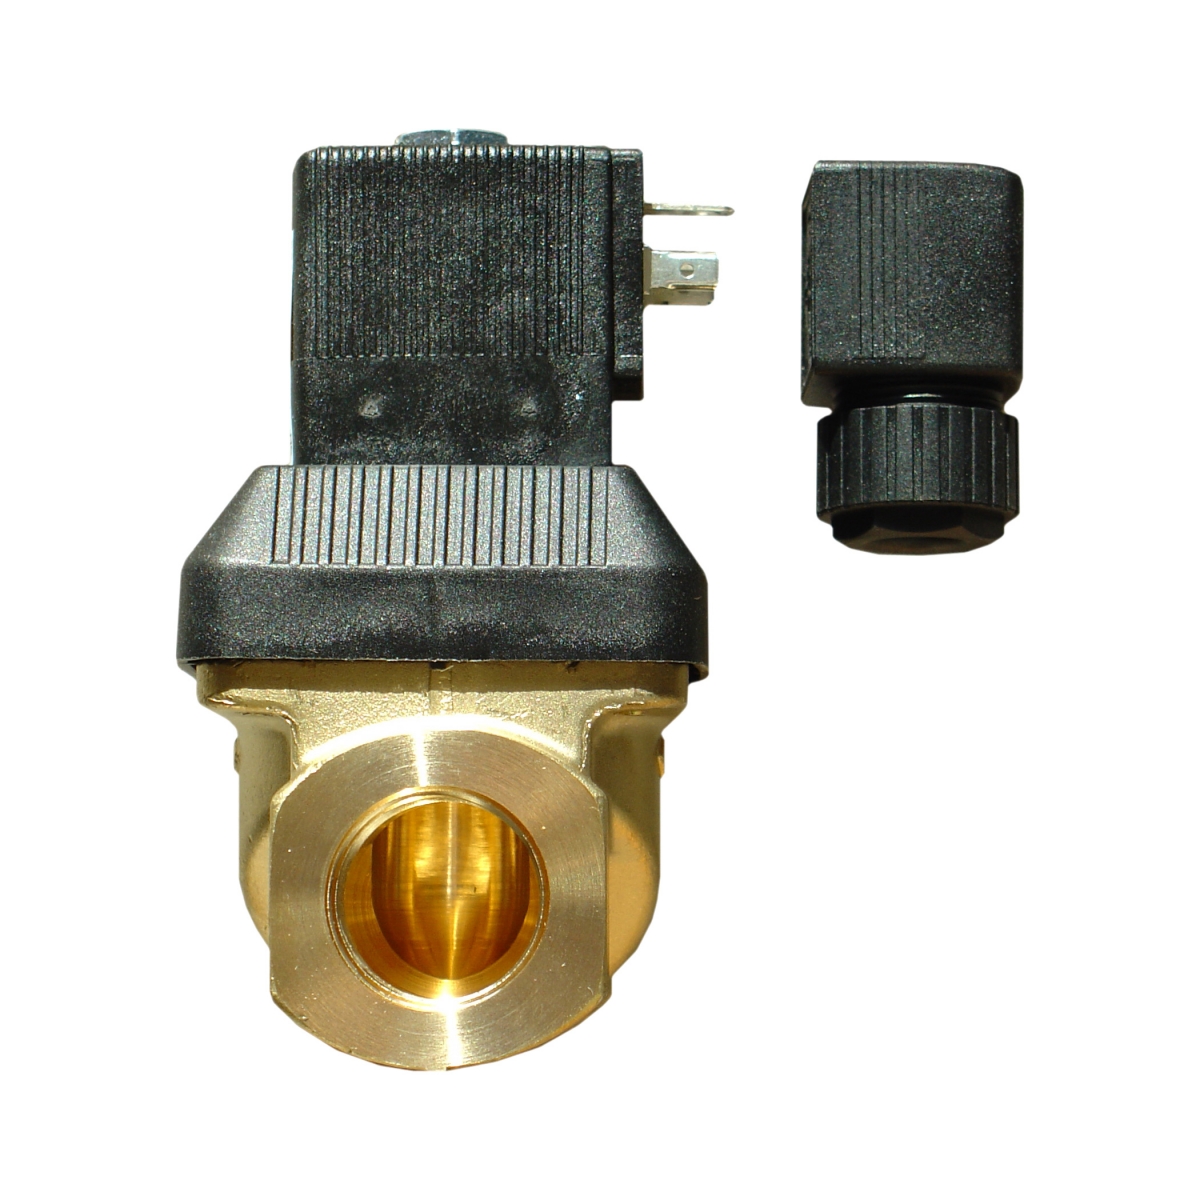 High quality solenoid valve made of brass 1”, 230VAC, normally closed High quality solenoid valve made of brass 1”, 230VAC, normally closed